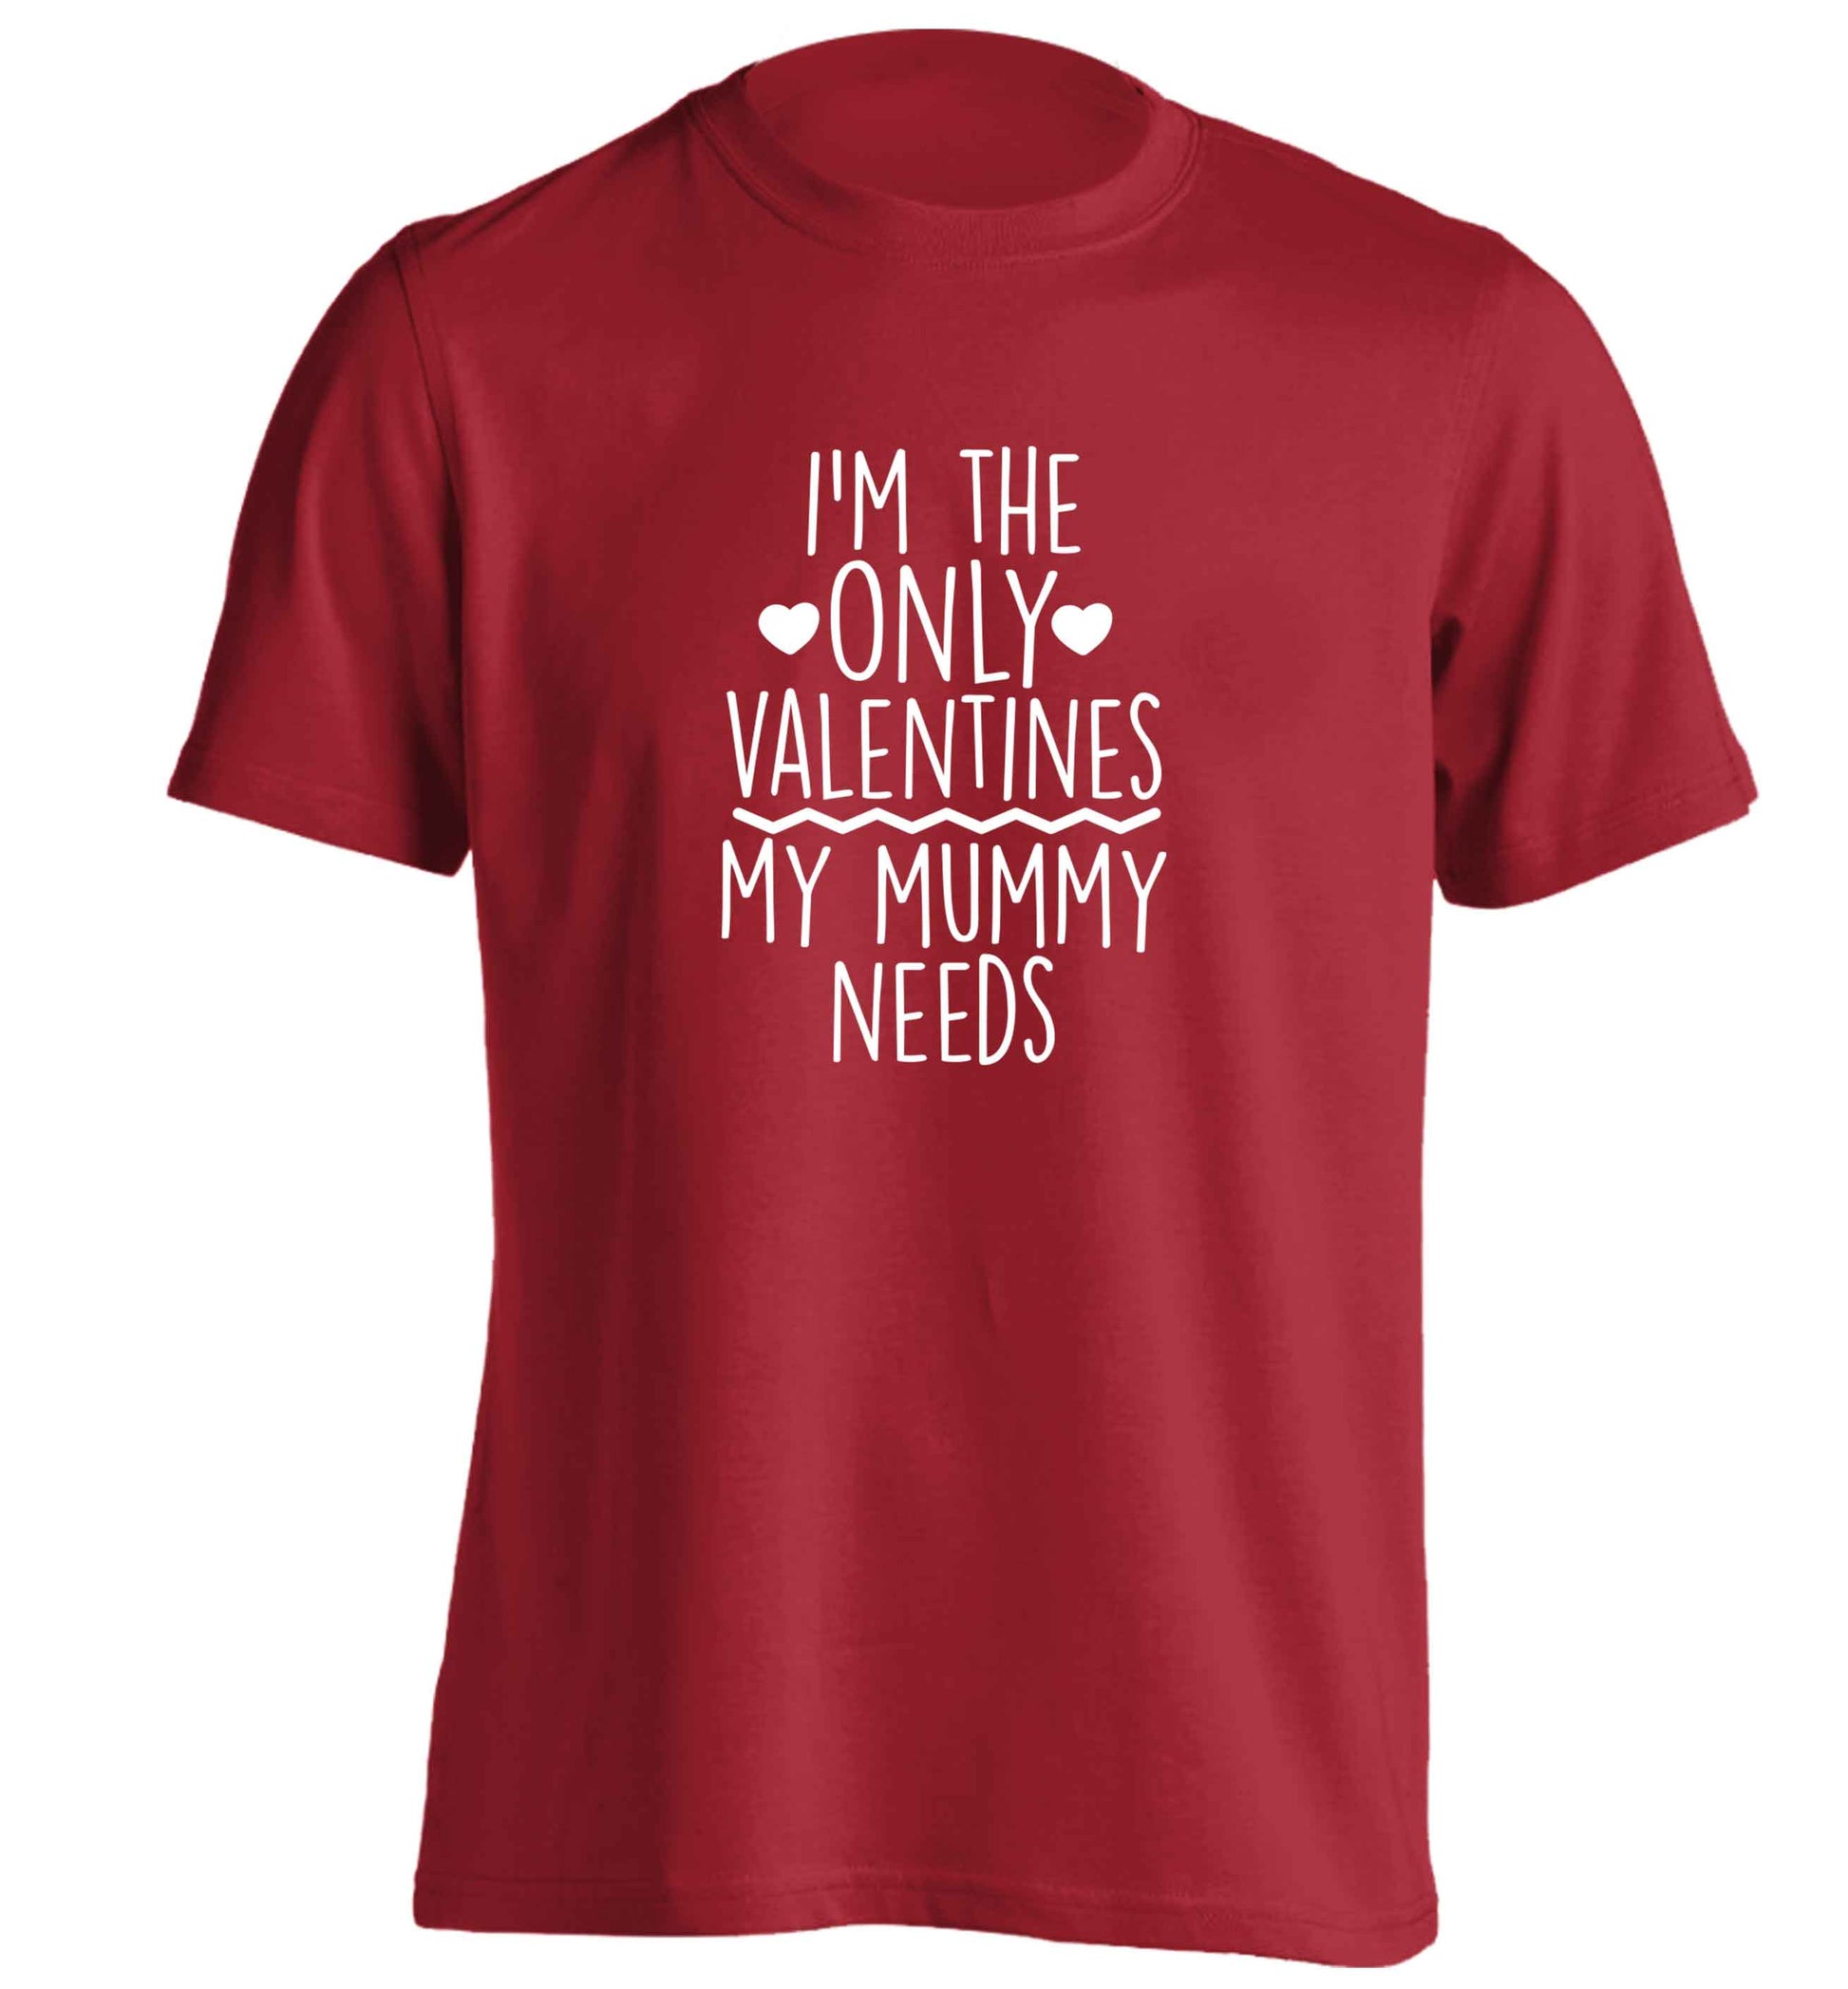 I'm the only valentines my mummy needs adults unisex red Tshirt 2XL